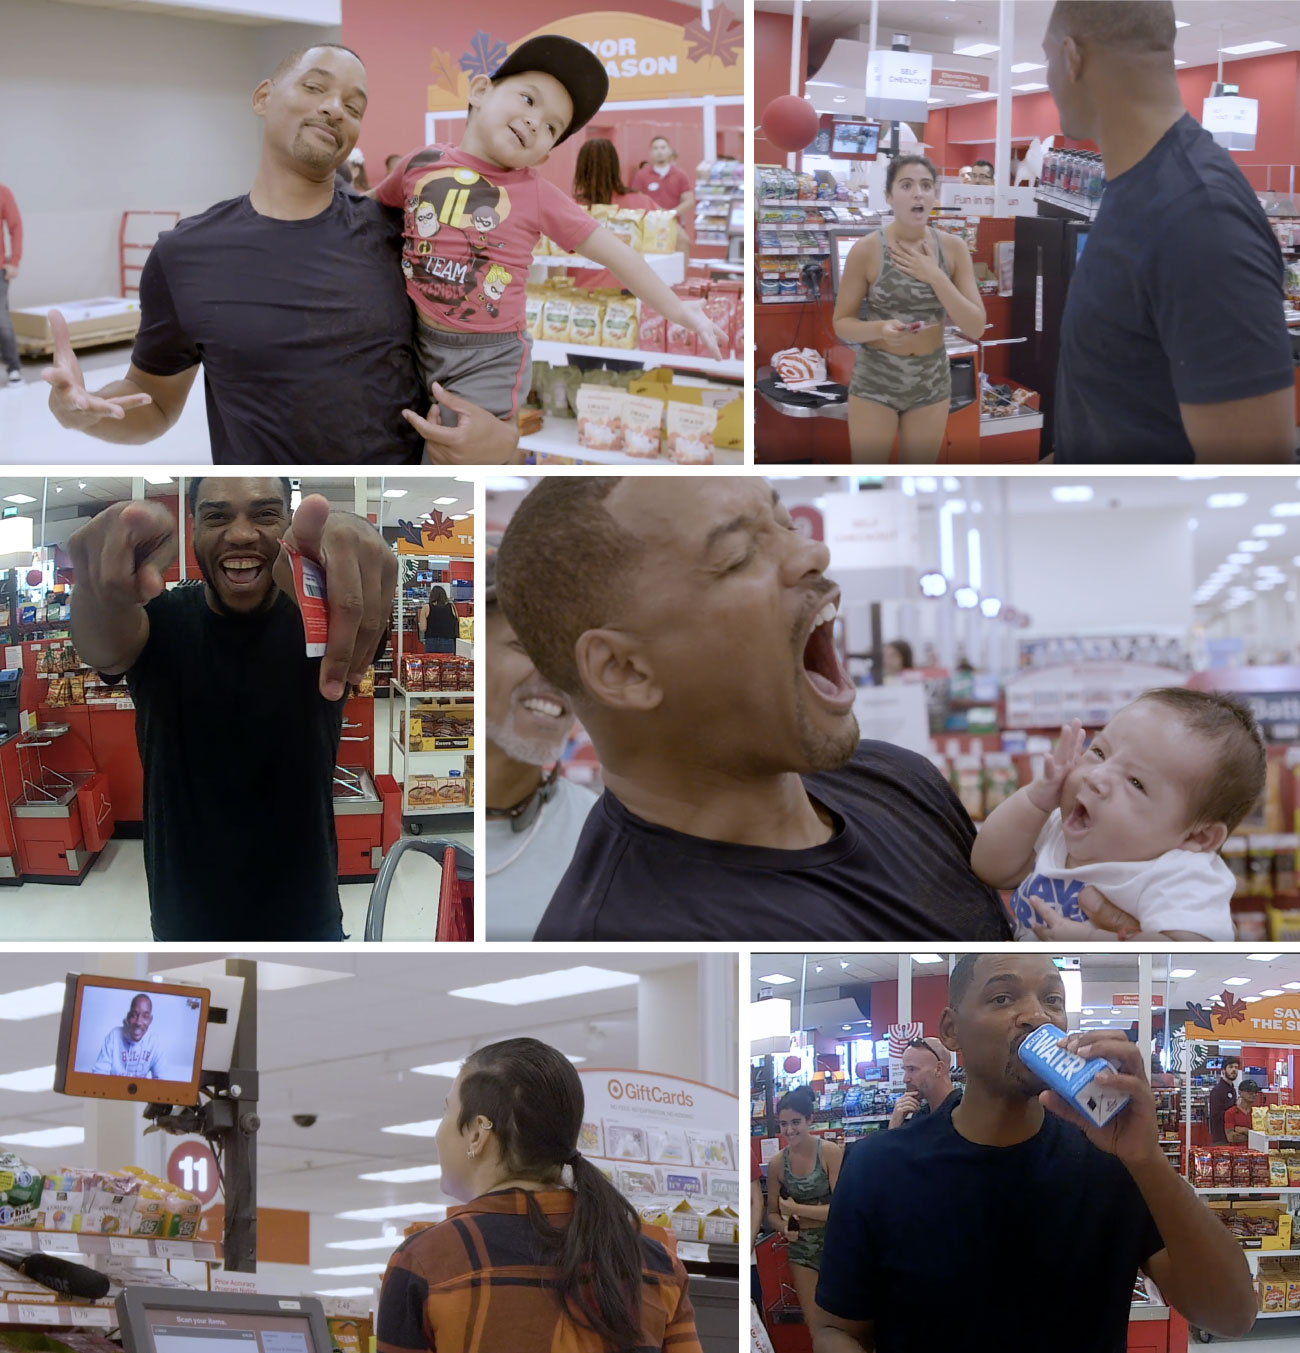 A collage of images showing Will Smith surprising and interacting with Target guests